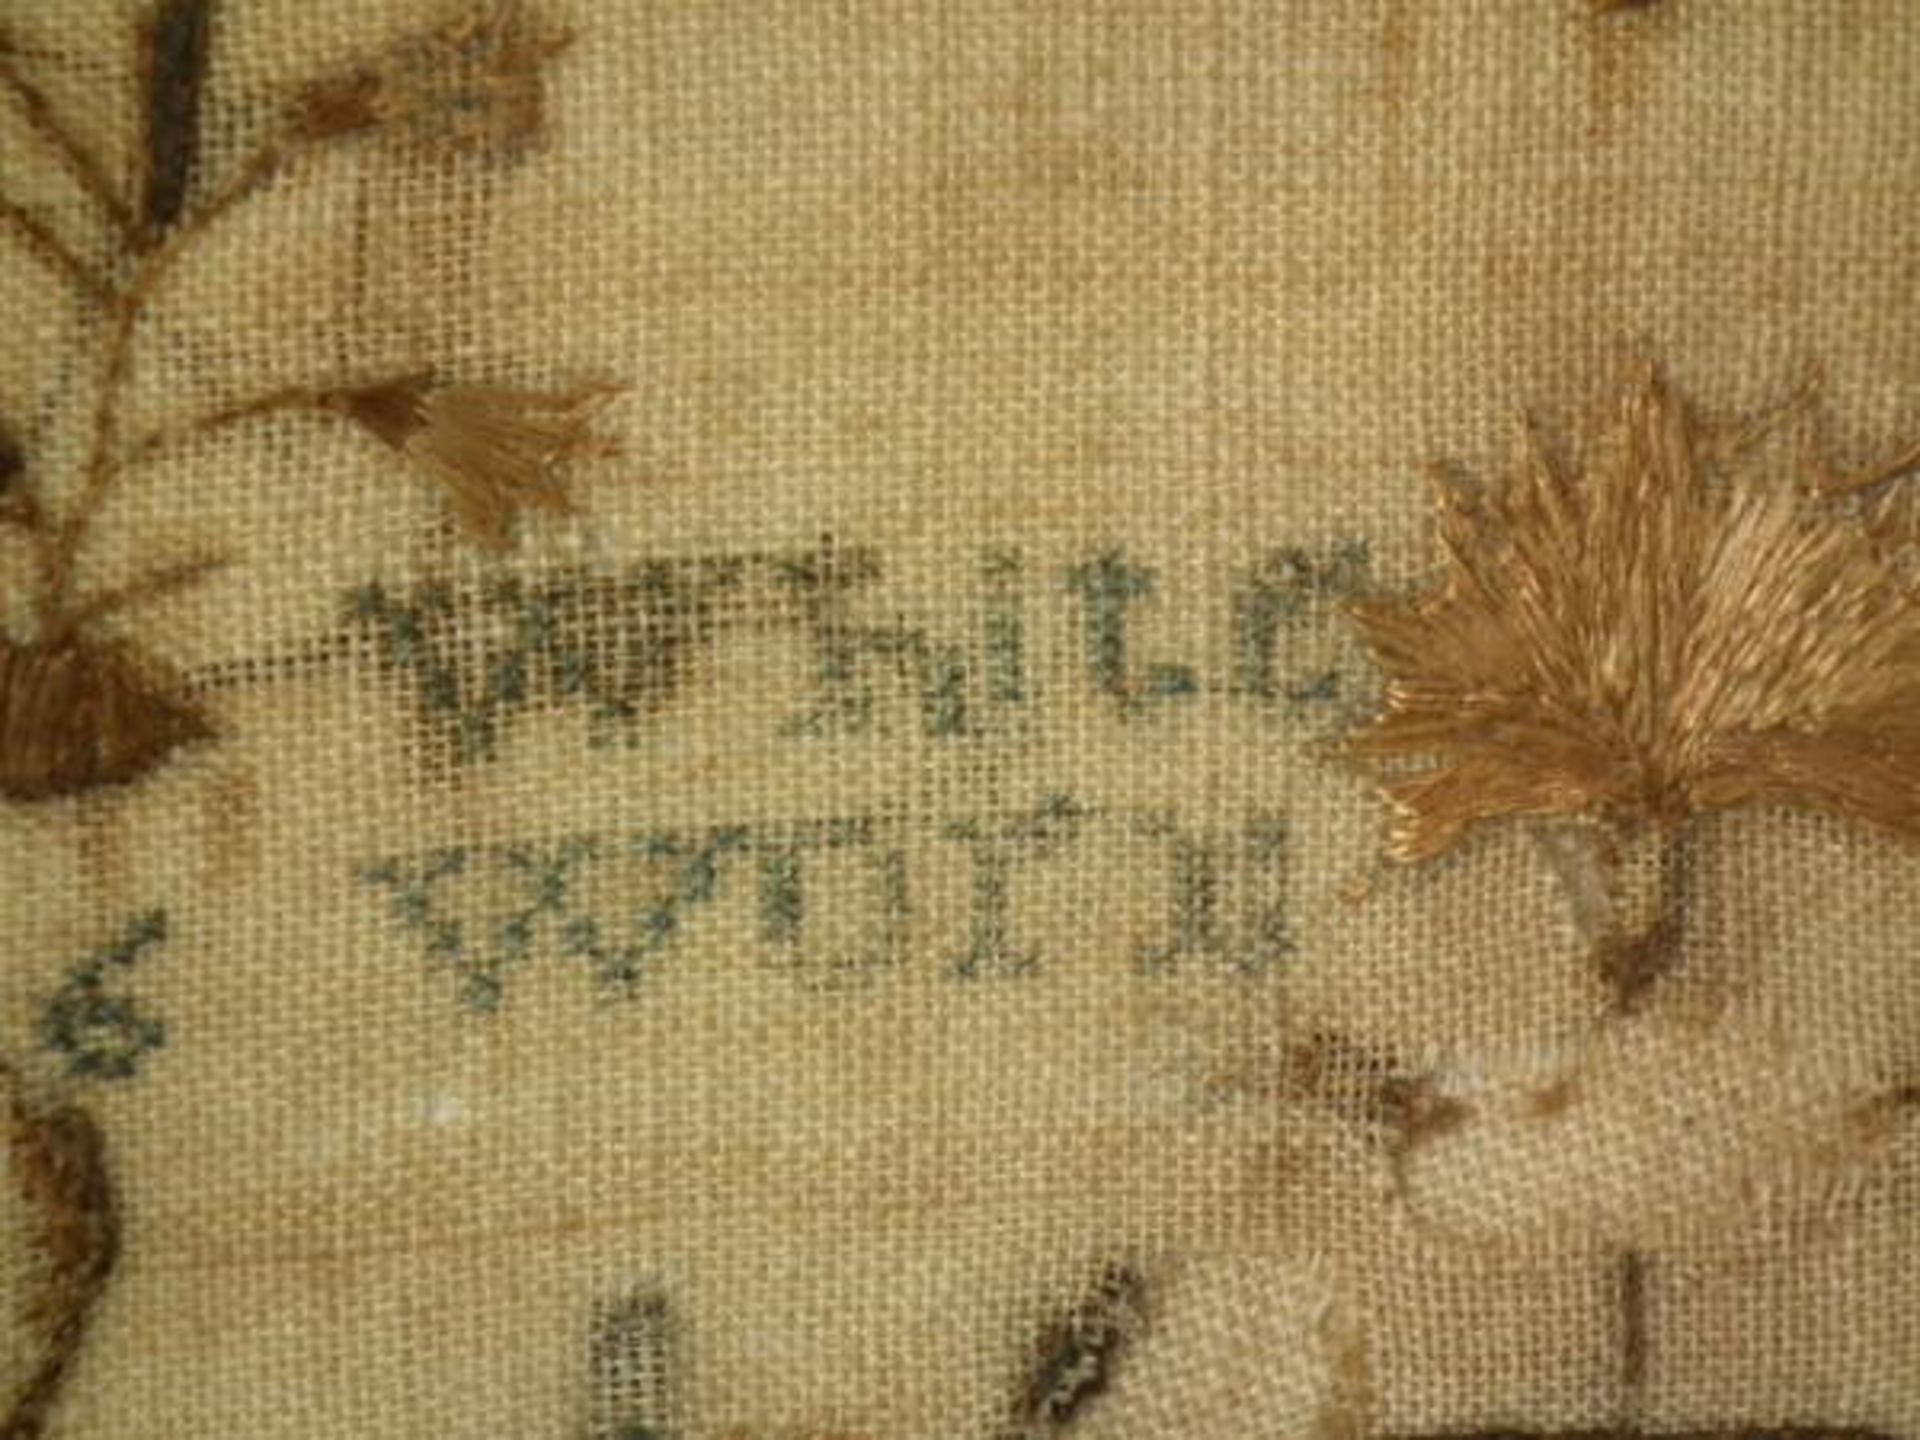 Needlework Hair & Silkwork Sampler dated 1796 by Charlotte White FREE UK DELIVERY - Image 22 of 30